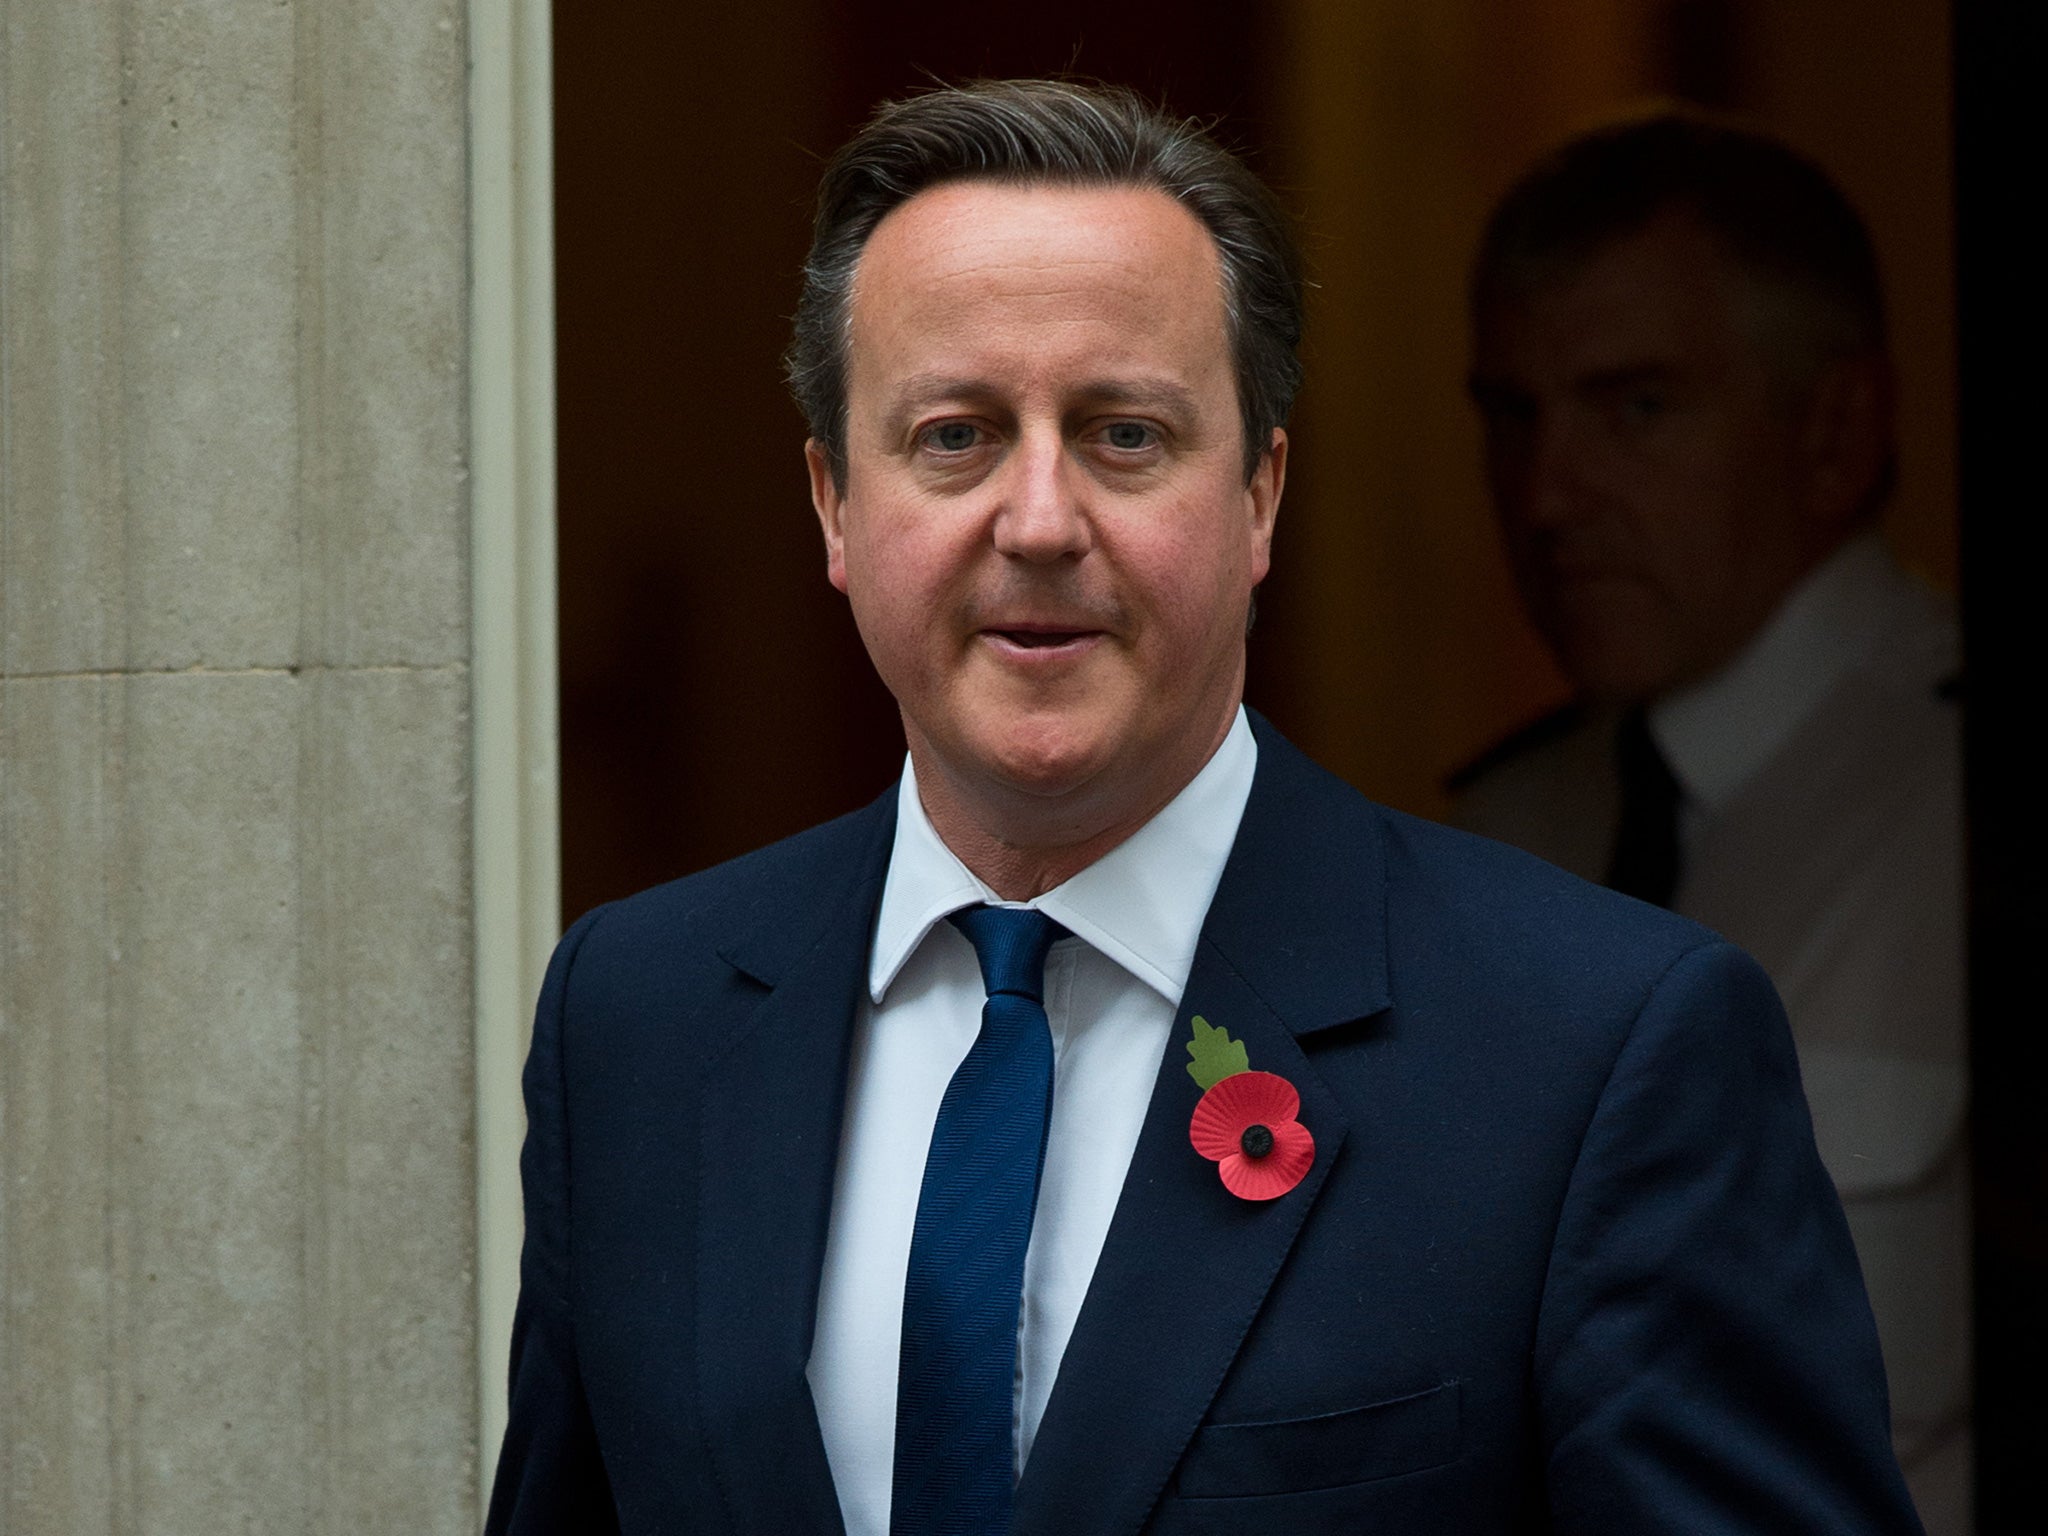 David Cameron complained of 'counter-productive' cuts in letter to council leader